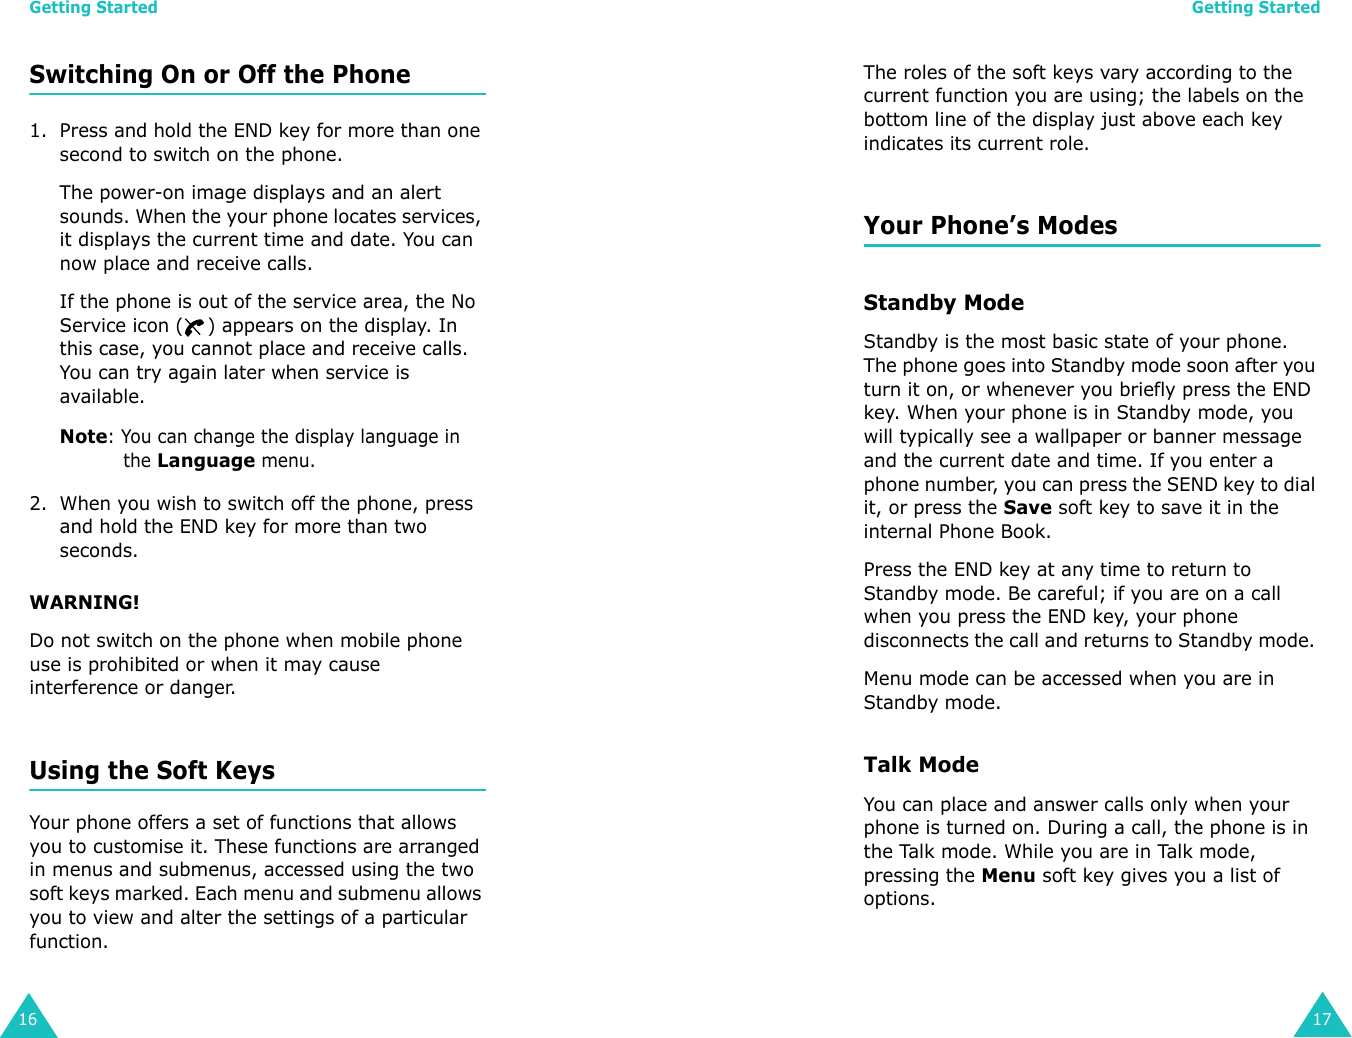 Getting Started16Switching On or Off the Phone1. Press and hold the END key for more than one second to switch on the phone.The power-on image displays and an alert sounds. When the your phone locates services, it displays the current time and date. You can now place and receive calls.If the phone is out of the service area, the No Service icon ( ) appears on the display. In this case, you cannot place and receive calls. You can try again later when service is available.Note: You can change the display language in the Language menu.2. When you wish to switch off the phone, press and hold the END key for more than two seconds.WARNING!Do not switch on the phone when mobile phone use is prohibited or when it may cause interference or danger.Using the Soft KeysYour phone offers a set of functions that allows you to customise it. These functions are arranged in menus and submenus, accessed using the two soft keys marked. Each menu and submenu allows you to view and alter the settings of a particular function.Getting Started17The roles of the soft keys vary according to the current function you are using; the labels on the bottom line of the display just above each key indicates its current role.Your Phone’s ModesStandby ModeStandby is the most basic state of your phone. The phone goes into Standby mode soon after you turn it on, or whenever you briefly press the END key. When your phone is in Standby mode, you will typically see a wallpaper or banner message and the current date and time. If you enter a phone number, you can press the SEND key to dial it, or press the Save soft key to save it in the internal Phone Book.Press the END key at any time to return to Standby mode. Be careful; if you are on a call when you press the END key, your phone disconnects the call and returns to Standby mode. Menu mode can be accessed when you are in Standby mode.Talk ModeYou can place and answer calls only when your phone is turned on. During a call, the phone is in the Talk mode. While you are in Talk mode, pressing the Menu soft key gives you a list of options. 